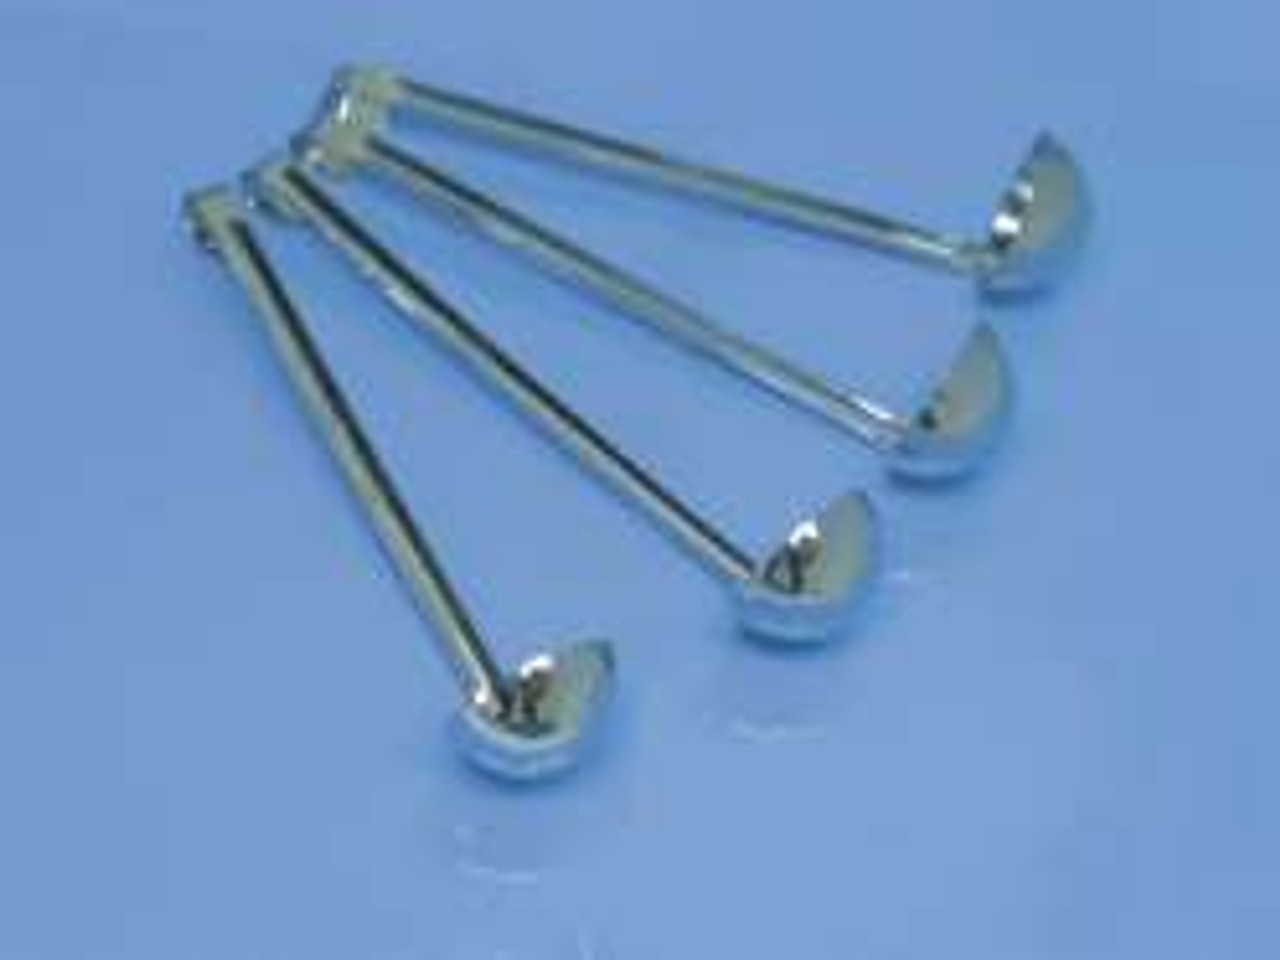 304 Stainless Ladle

Satin finish
All stainless steel construction
Crevice free construction